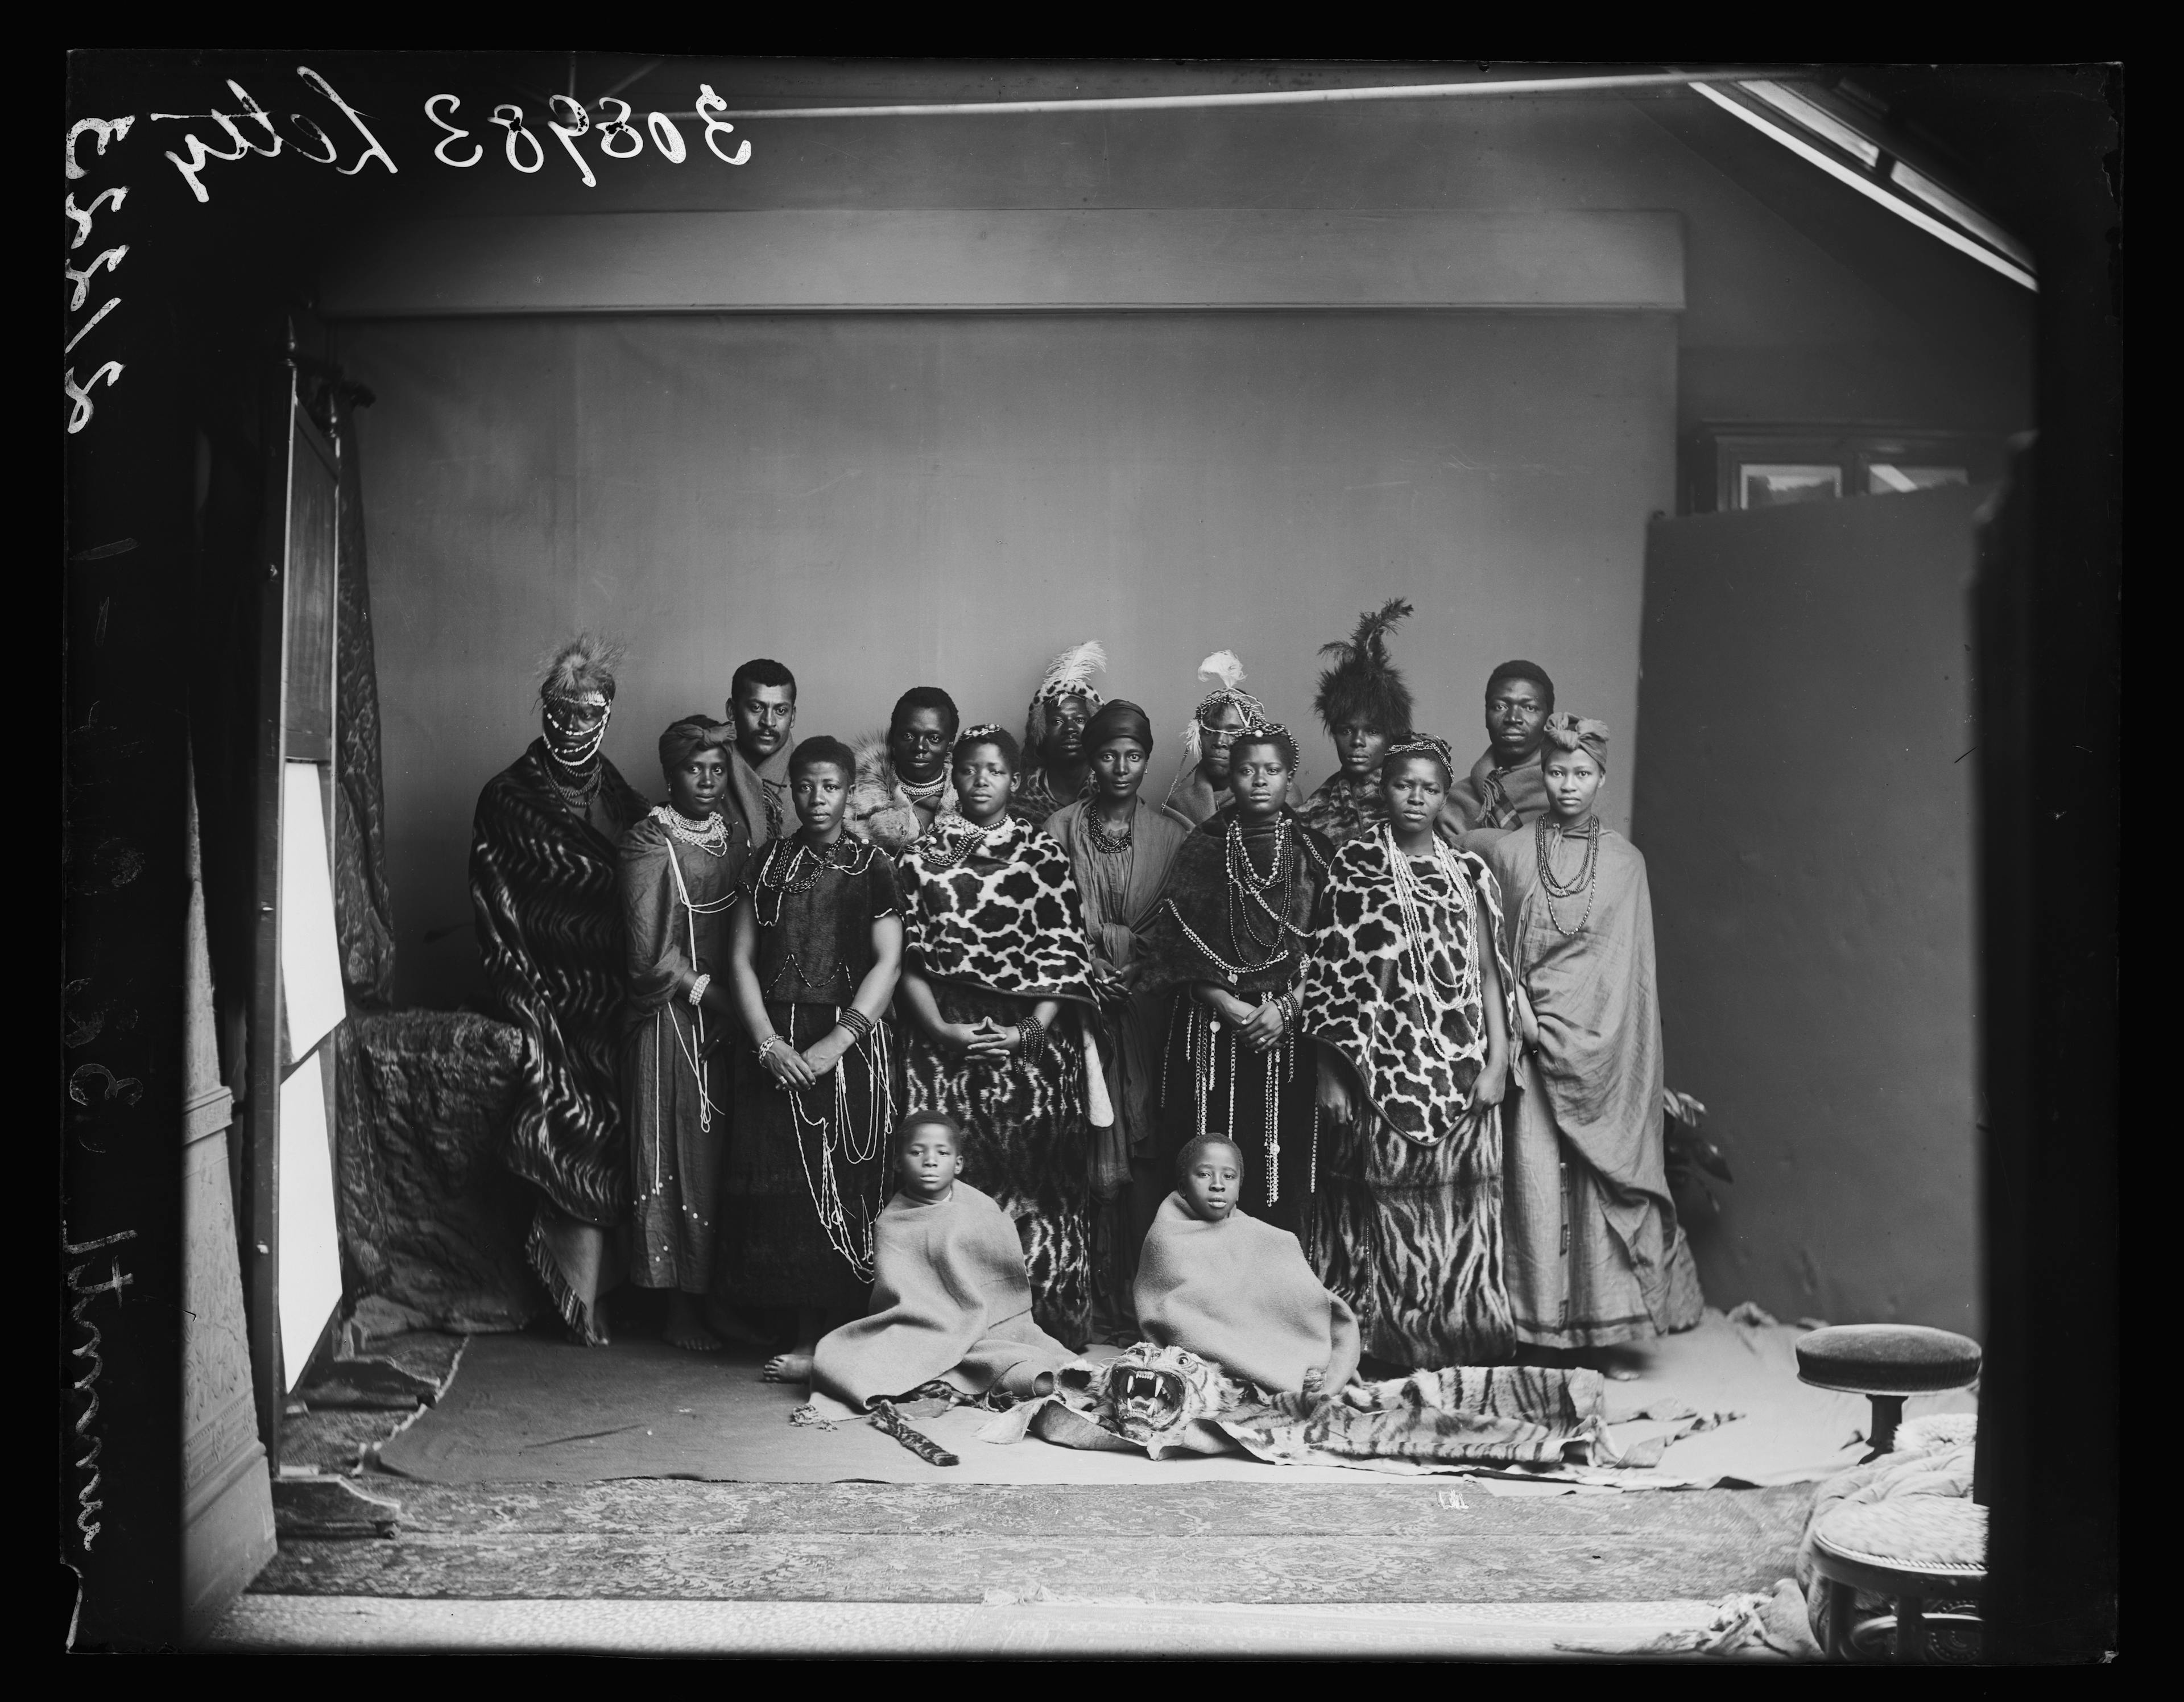 A black and white photo showing a group of Black people in traditional dress. Standing are 14 adults, men and women. Seated at their feet are two children with a tiger skin beneath them. 